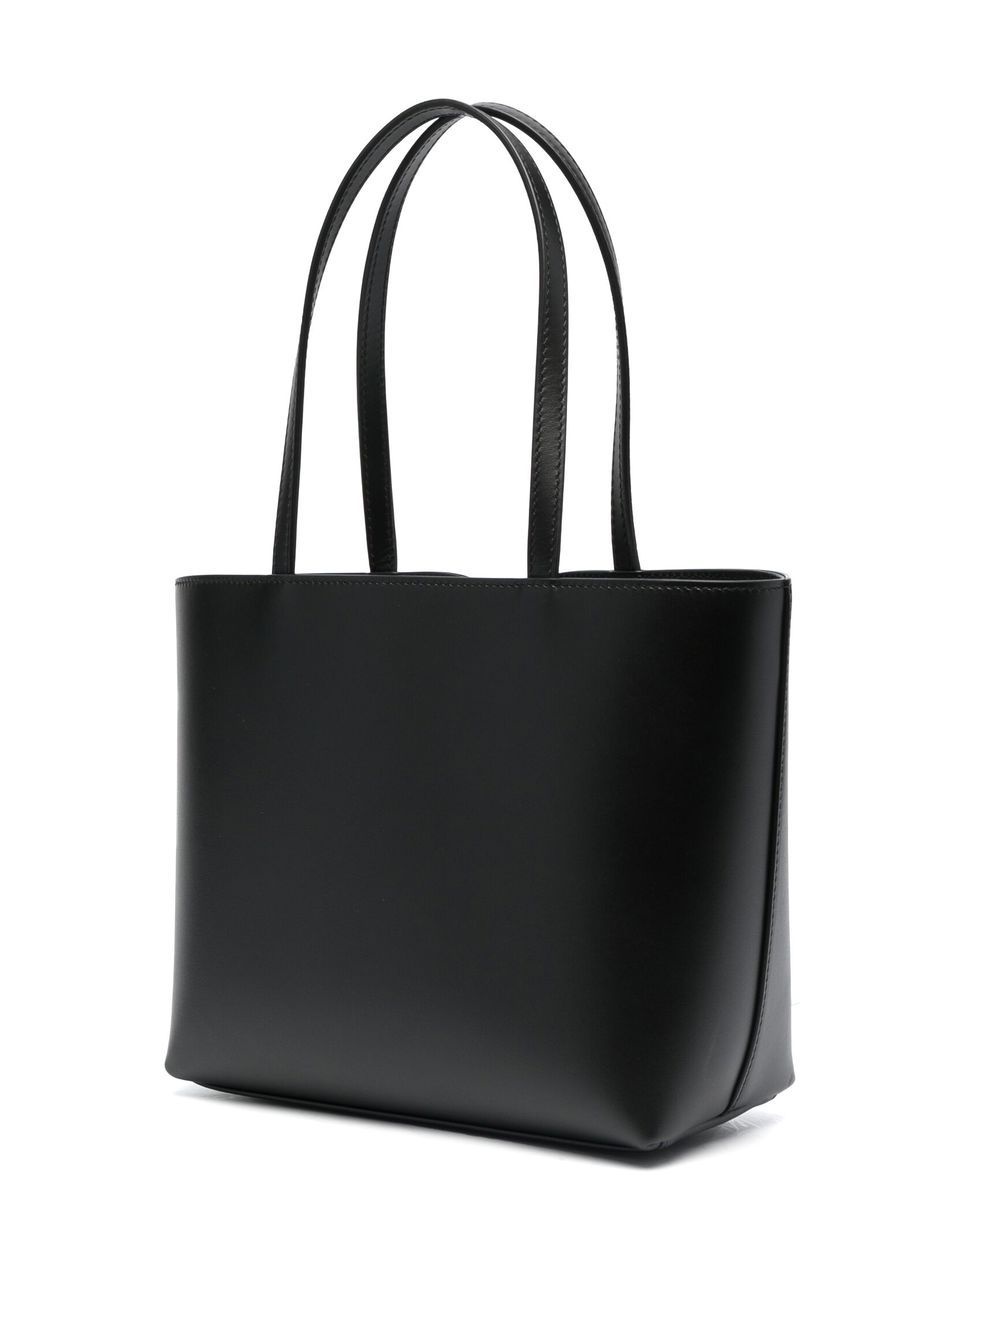 Dg logo small leather tote bag - 2